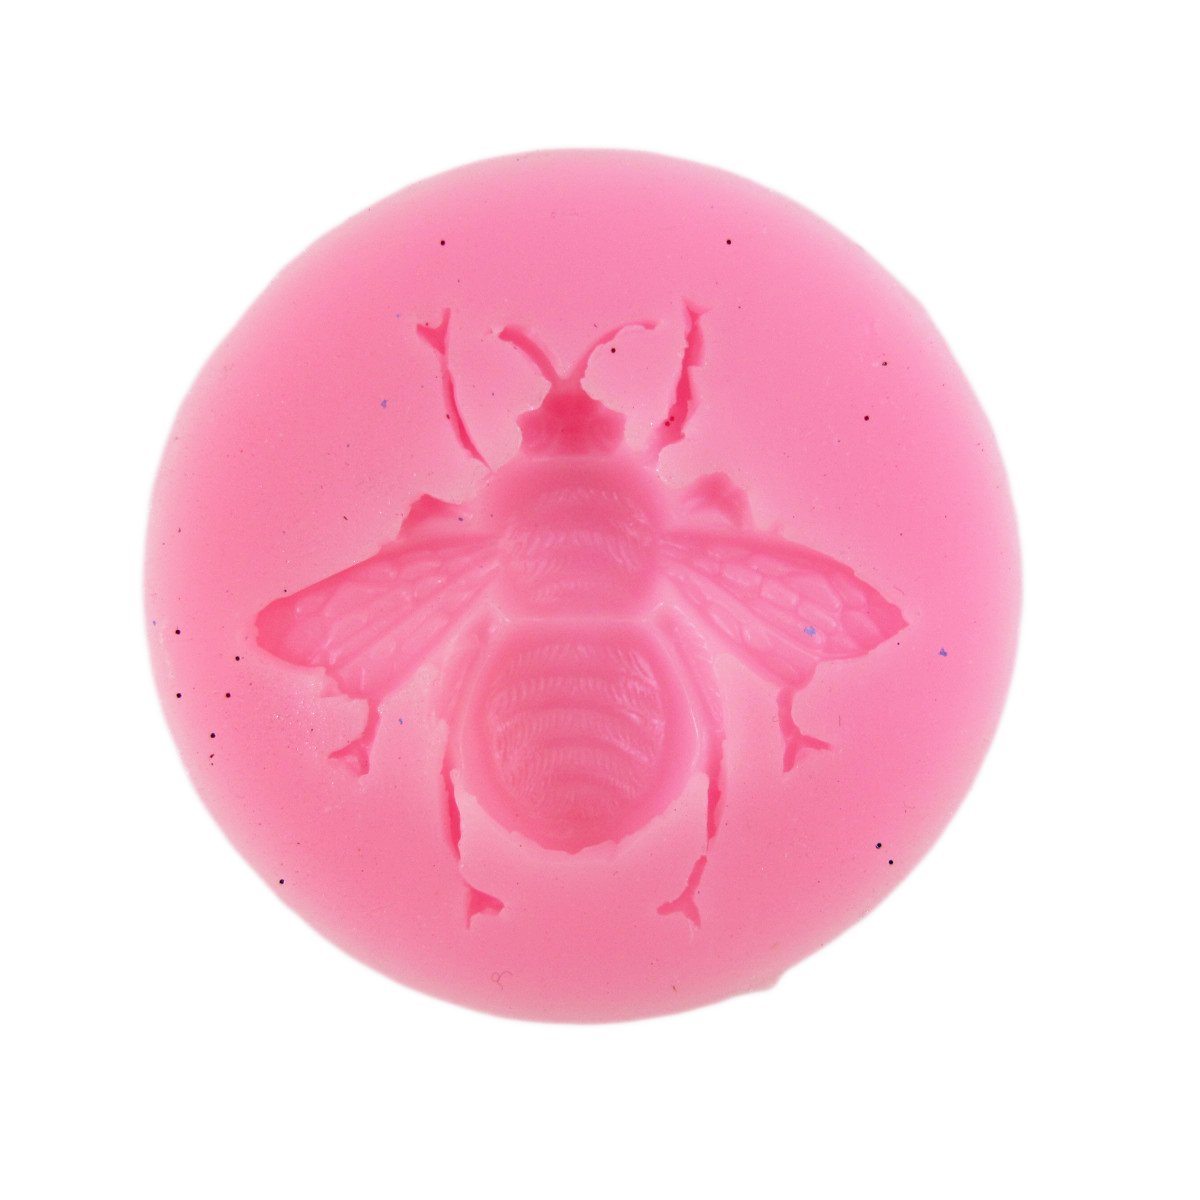 Bee Silicone Mold for Jewelry and Crafts, Resin Obsession